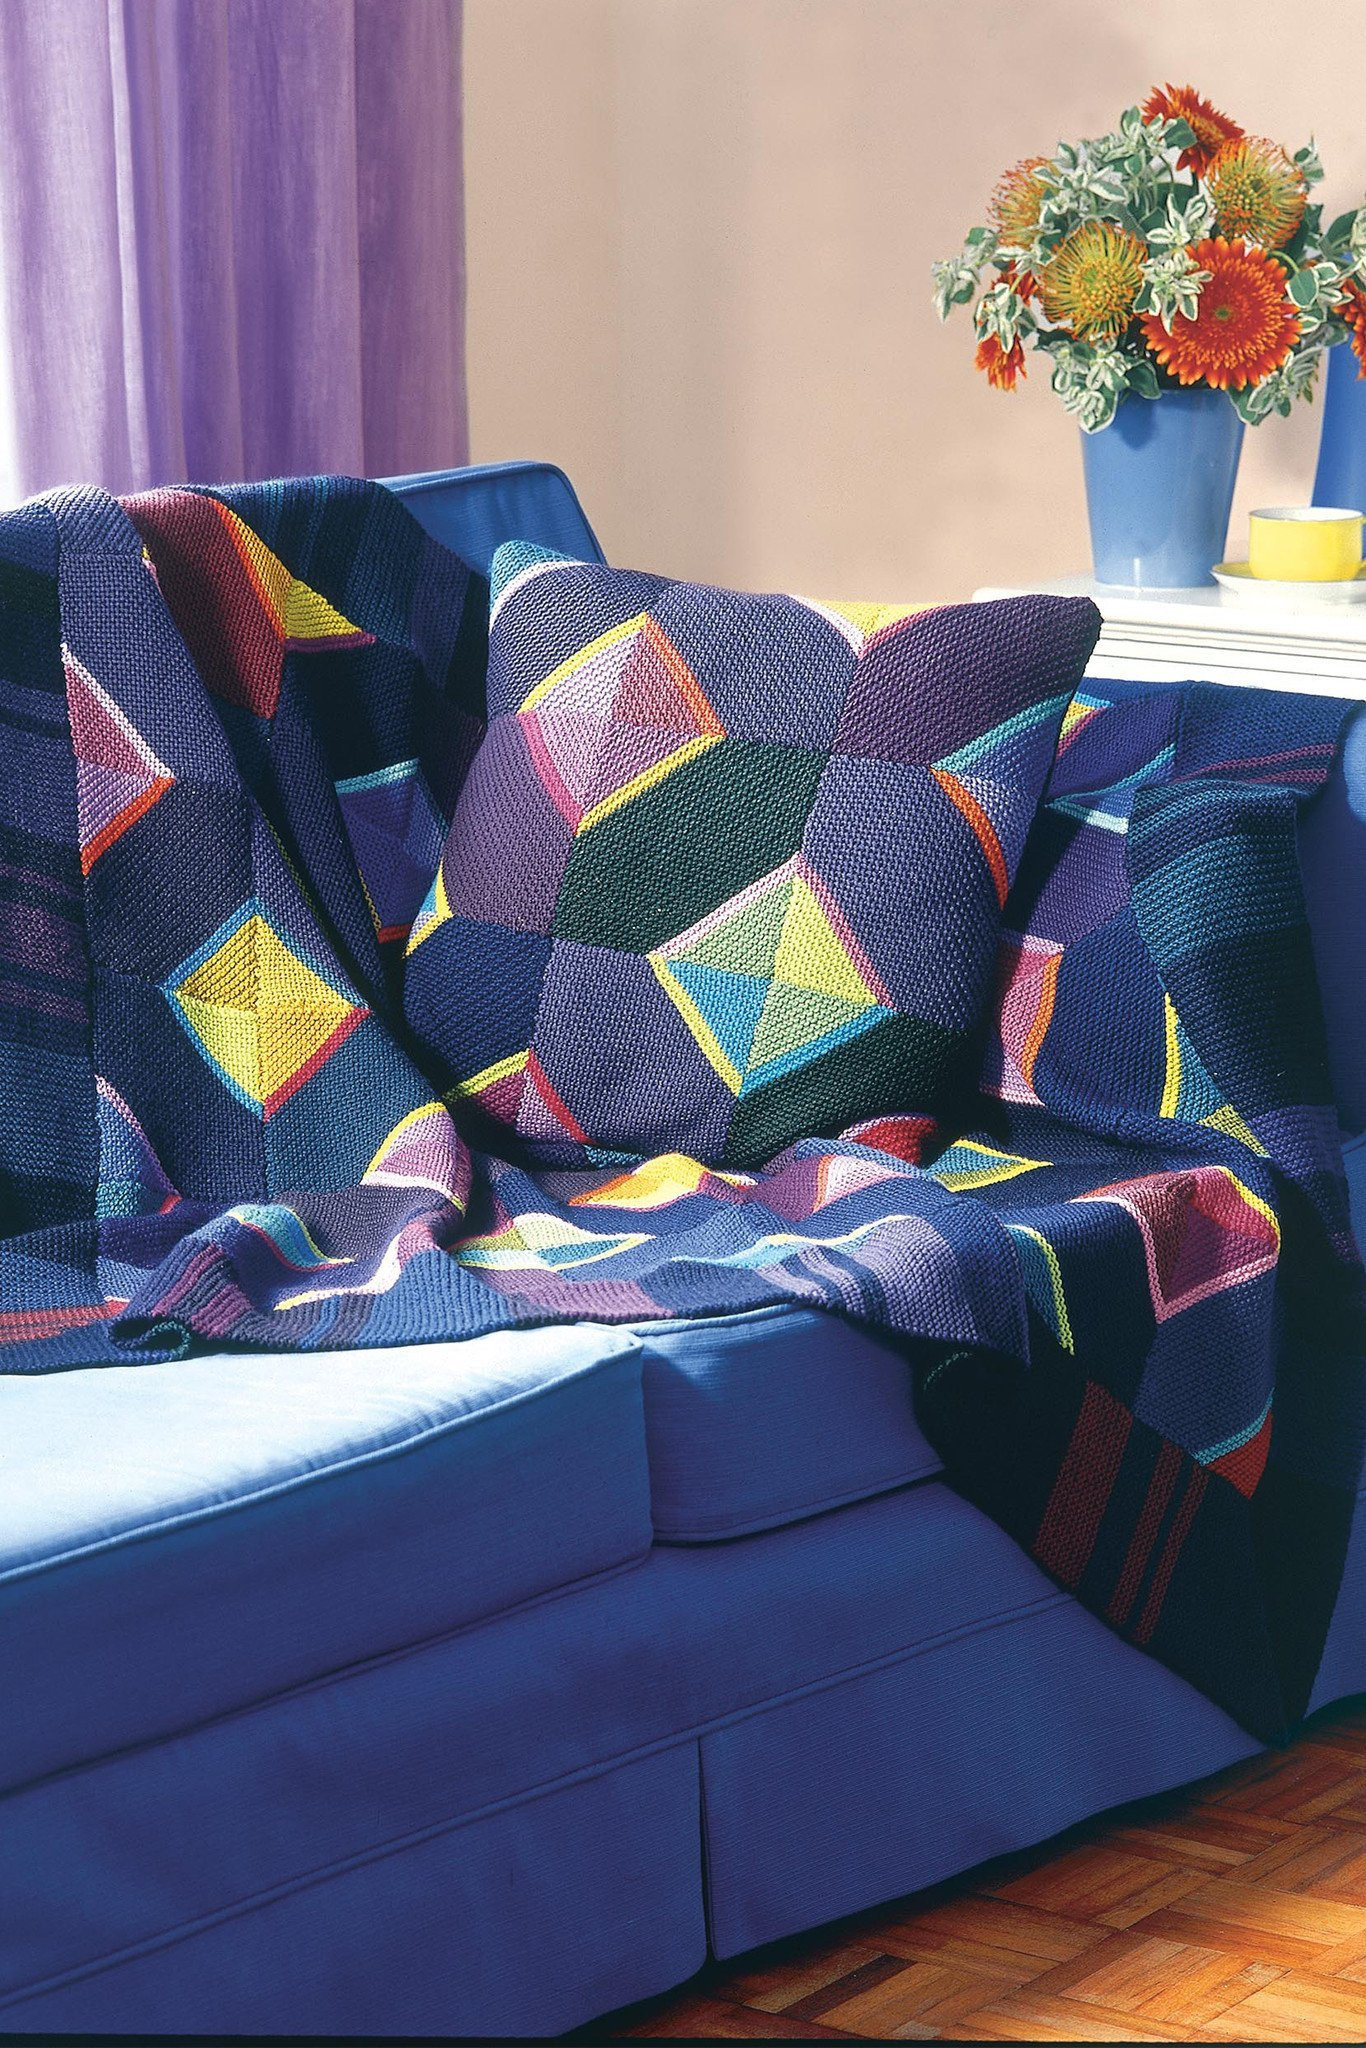 Patchwork Knitting Patterns For Blankets Patchwork Blanket And Cushion Geometric Knitting Patterns